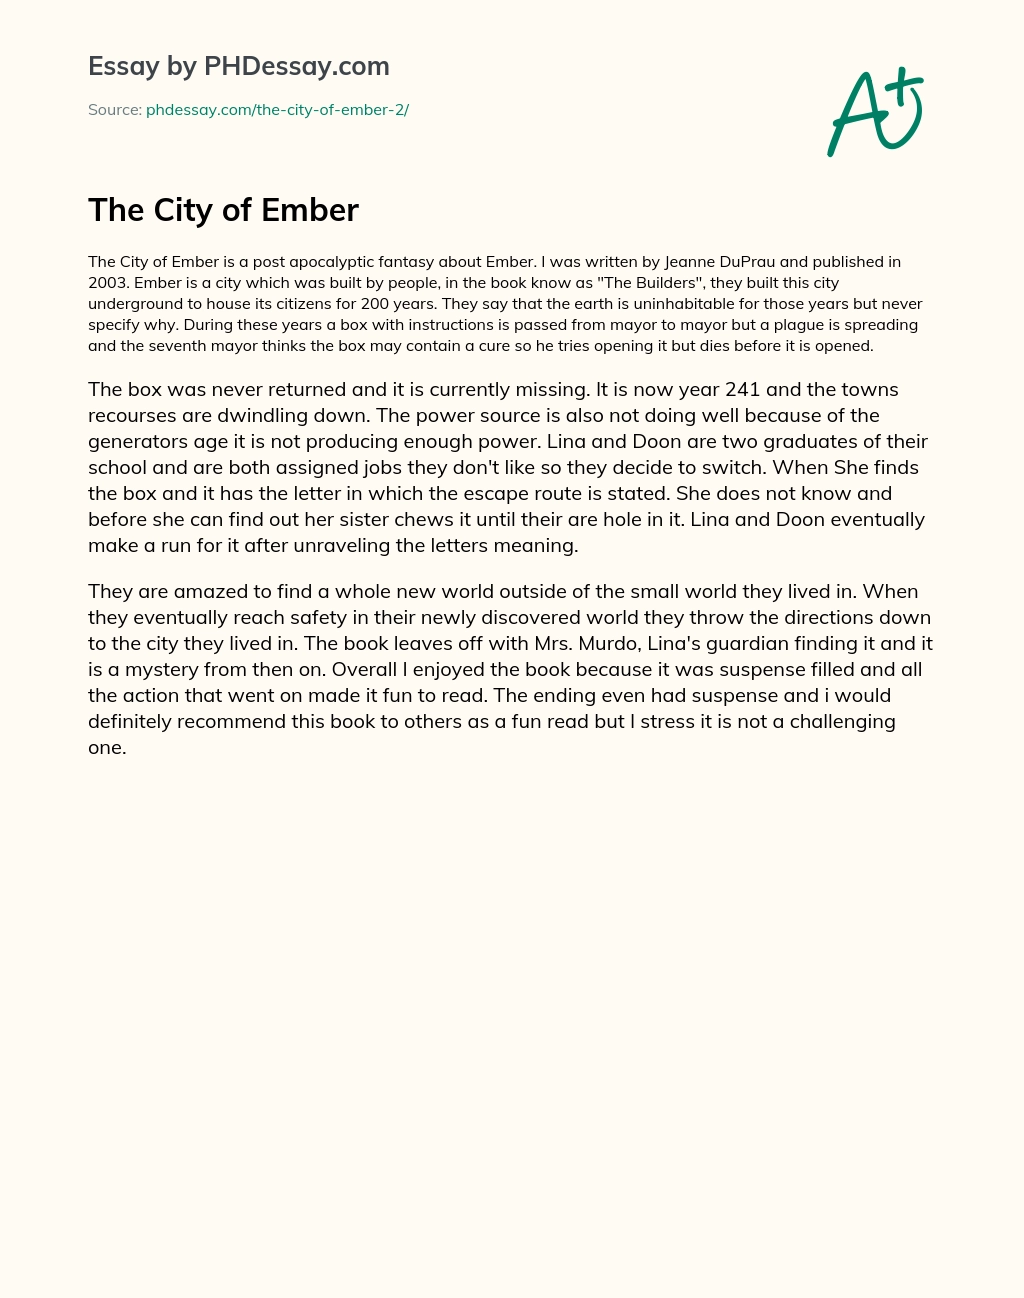 The City of Ember essay